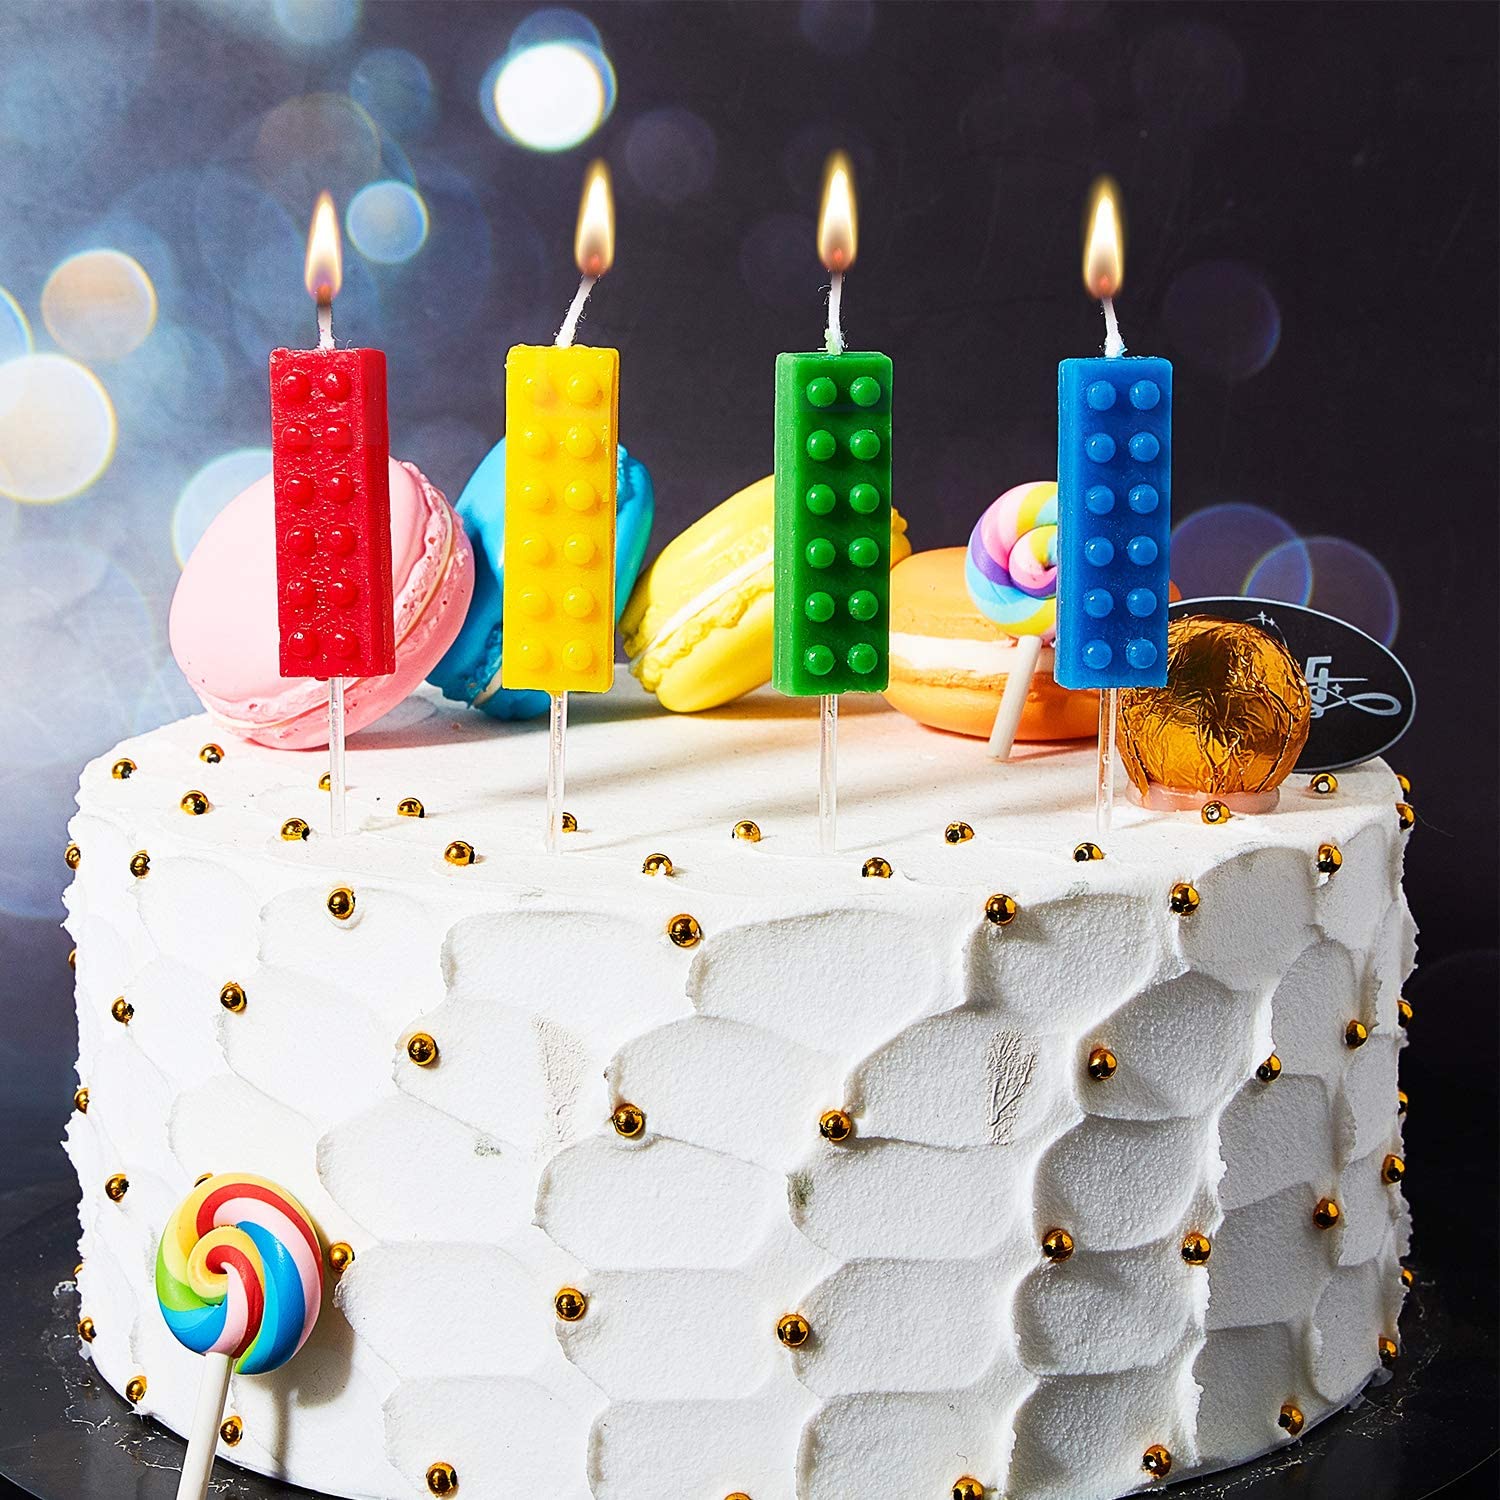 lego-party-ideas-candles